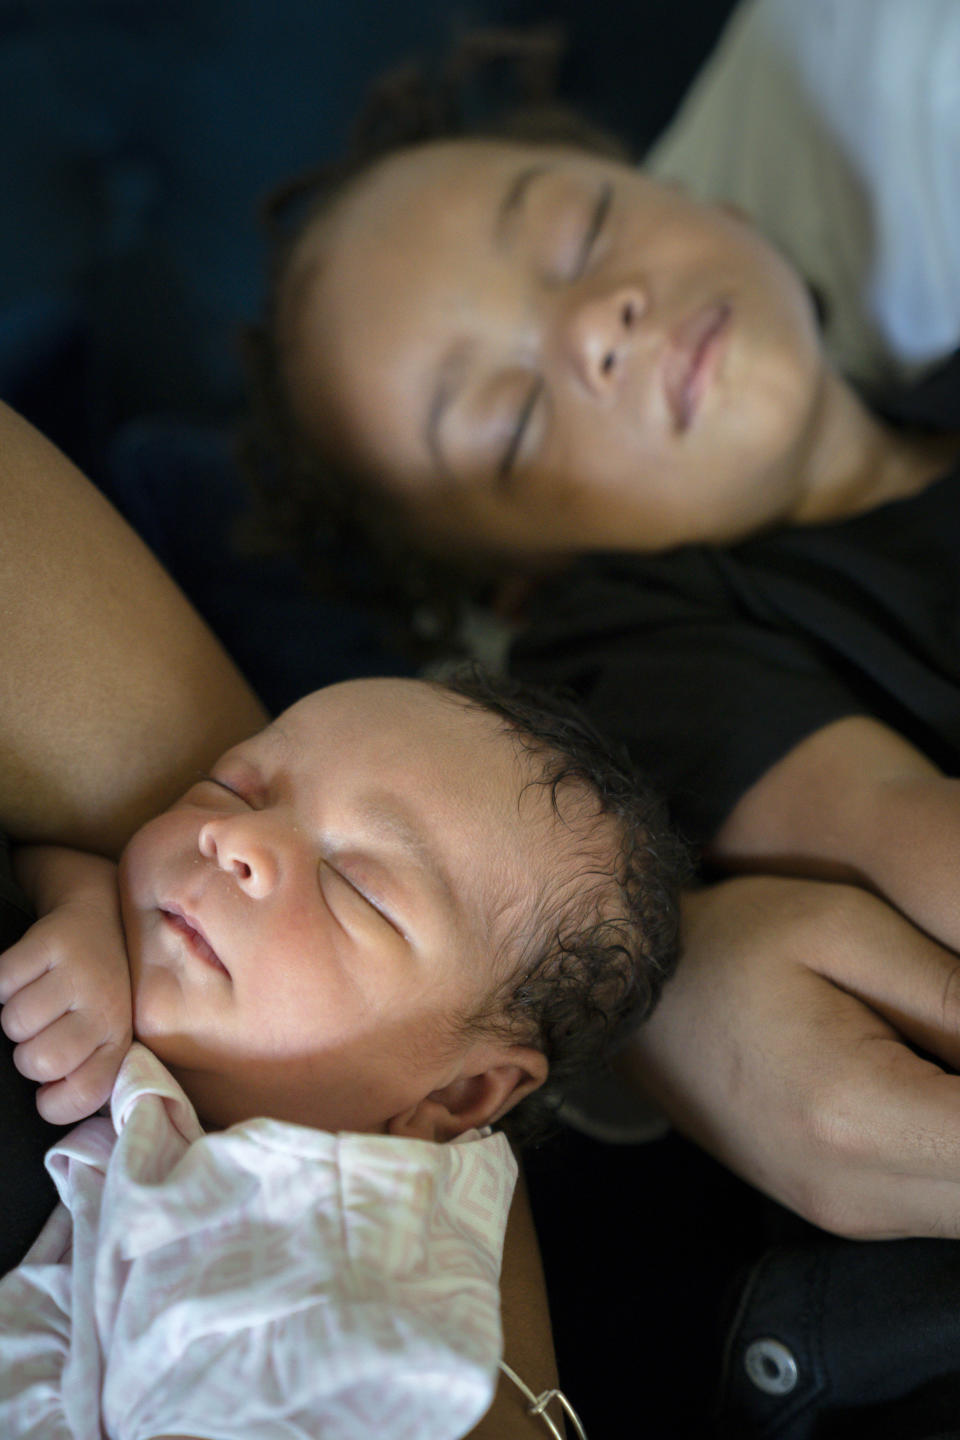 Aaliyah Wright, 25, of Washington, hold newborn daughter Kali, as her husband Kainan Wright, 24, of Washington, holds their sleeping son Khaza, 1, during a visit to the children's grandmother in Accokeek, Md., Tuesday, Aug. 9, 2022. A landmark social program is being pioneered in the nation’s capital. Coined “Baby Bonds,” the program is designed to narrow the wealth gap. The program would provide children of the city’s poorest families up to $25,000 when they reach adulthood. (AP Photo/Jacquelyn Martin)